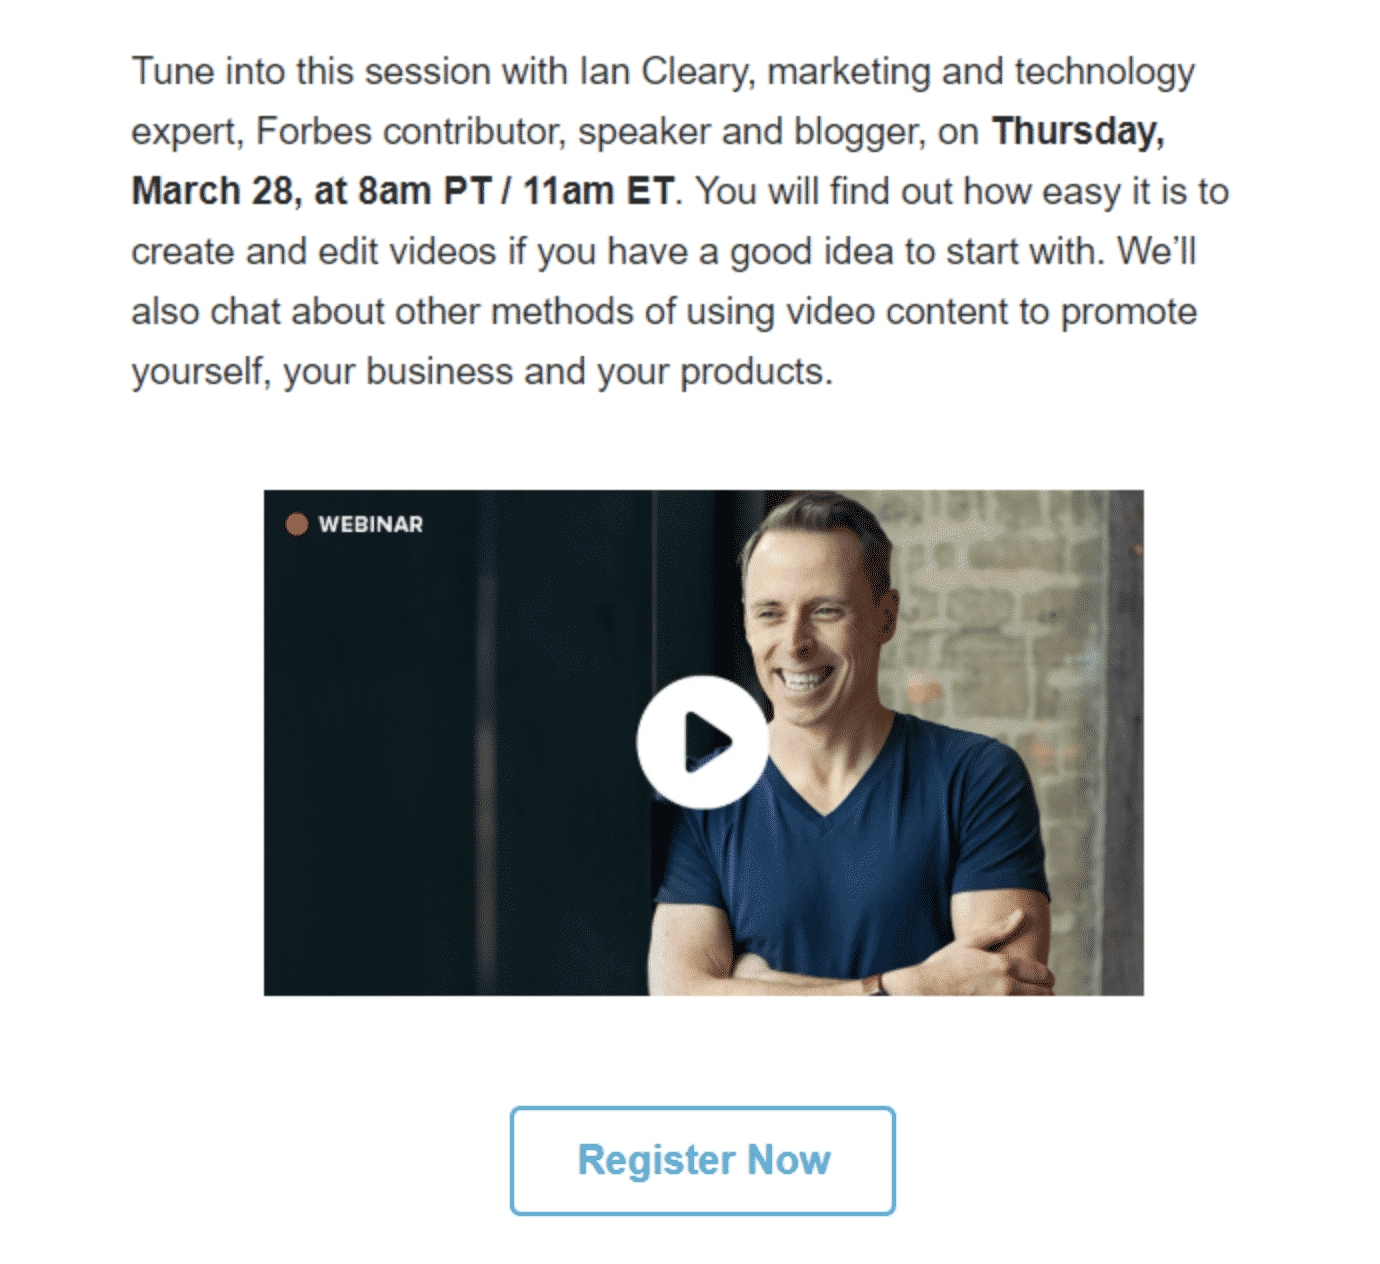 Ian Cleary - Webinar Invitation - Static image plus play button